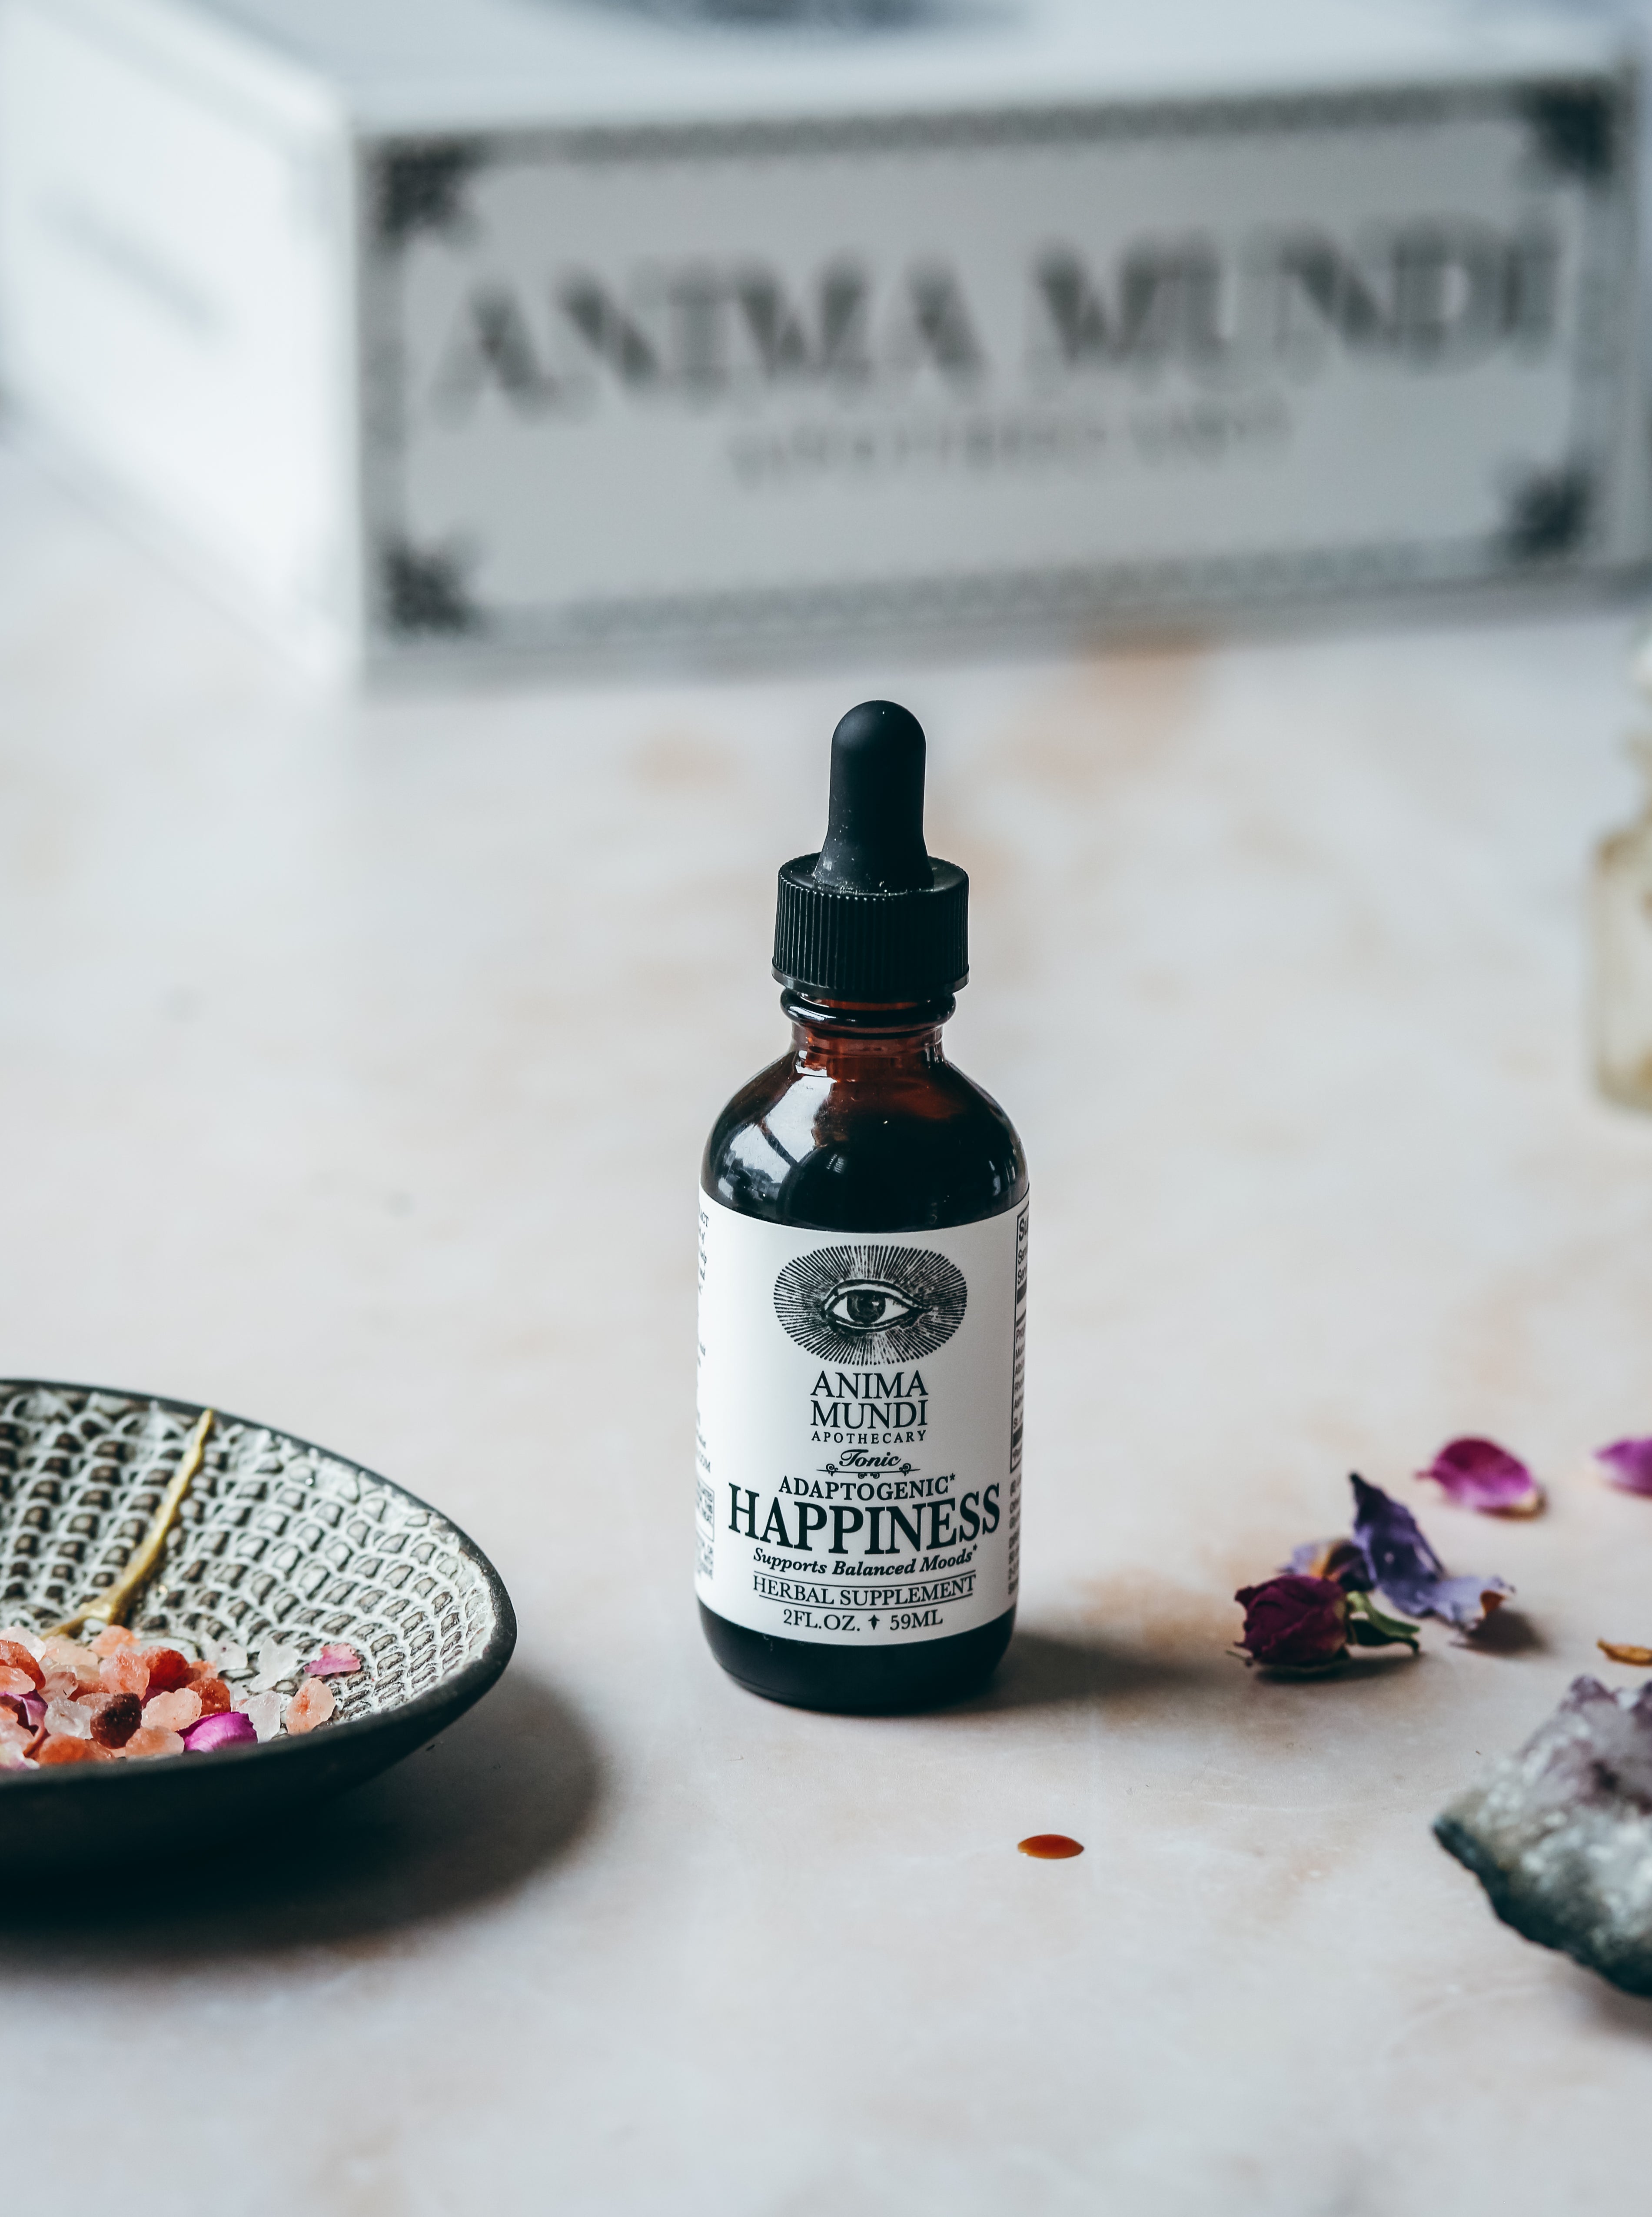 HAPPINESS Tonic | Supports Balanced Moods*